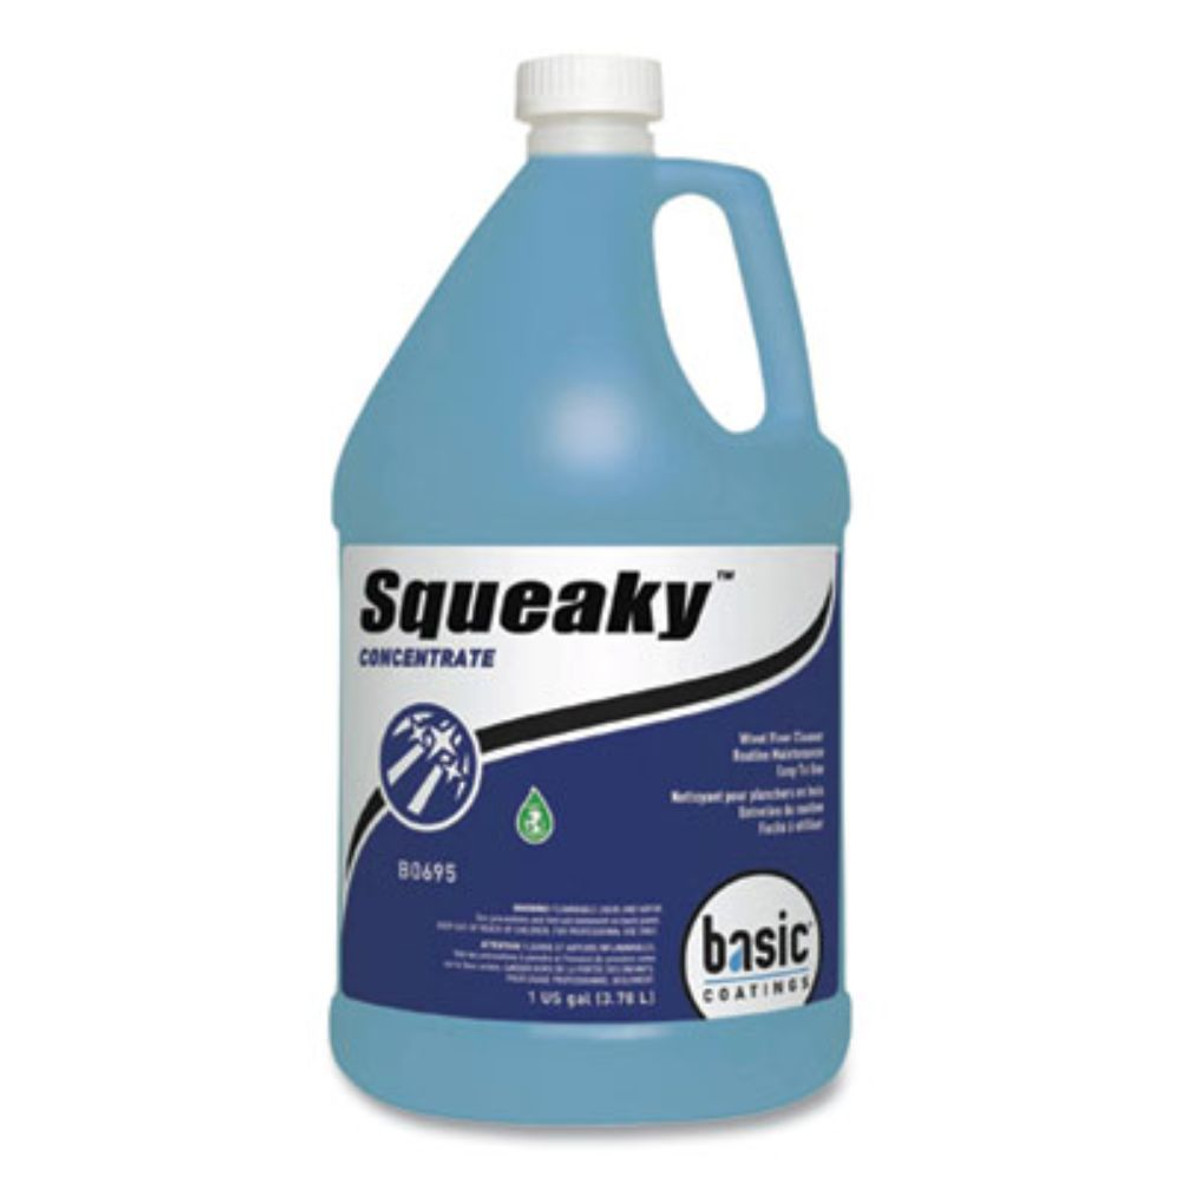 Betco® Squeaky Concentrate Floor Cleaner, Characteristic Scent